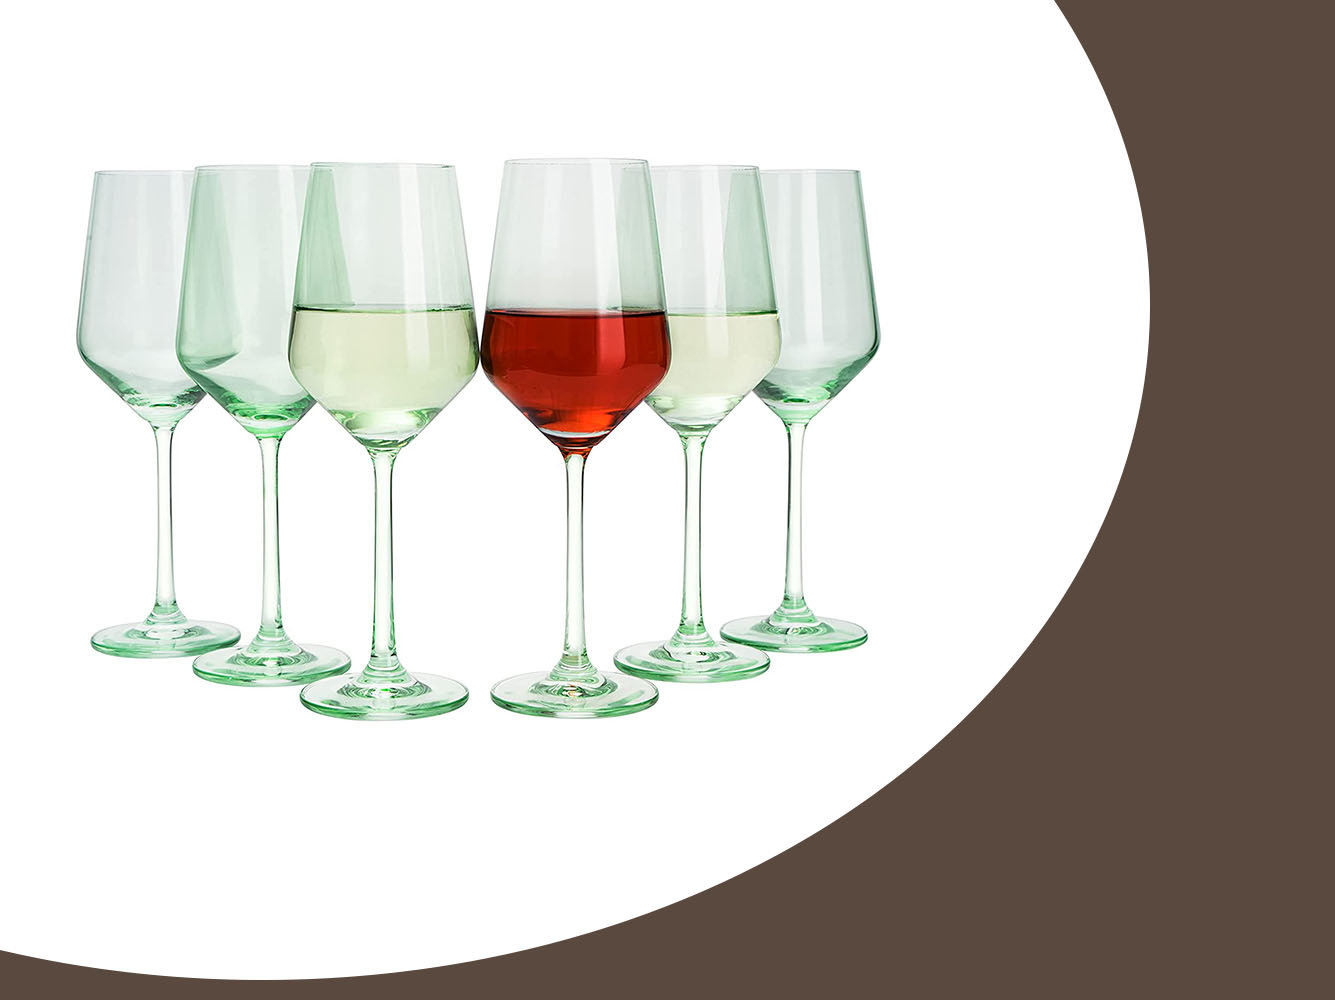 Colored Wine Glass Set, Large 12 oz Glasses Set of 6, Unique Italian Style  Tall Stemmed for White& Red Wine, Water, Margarita Glasses, Color Tumbler